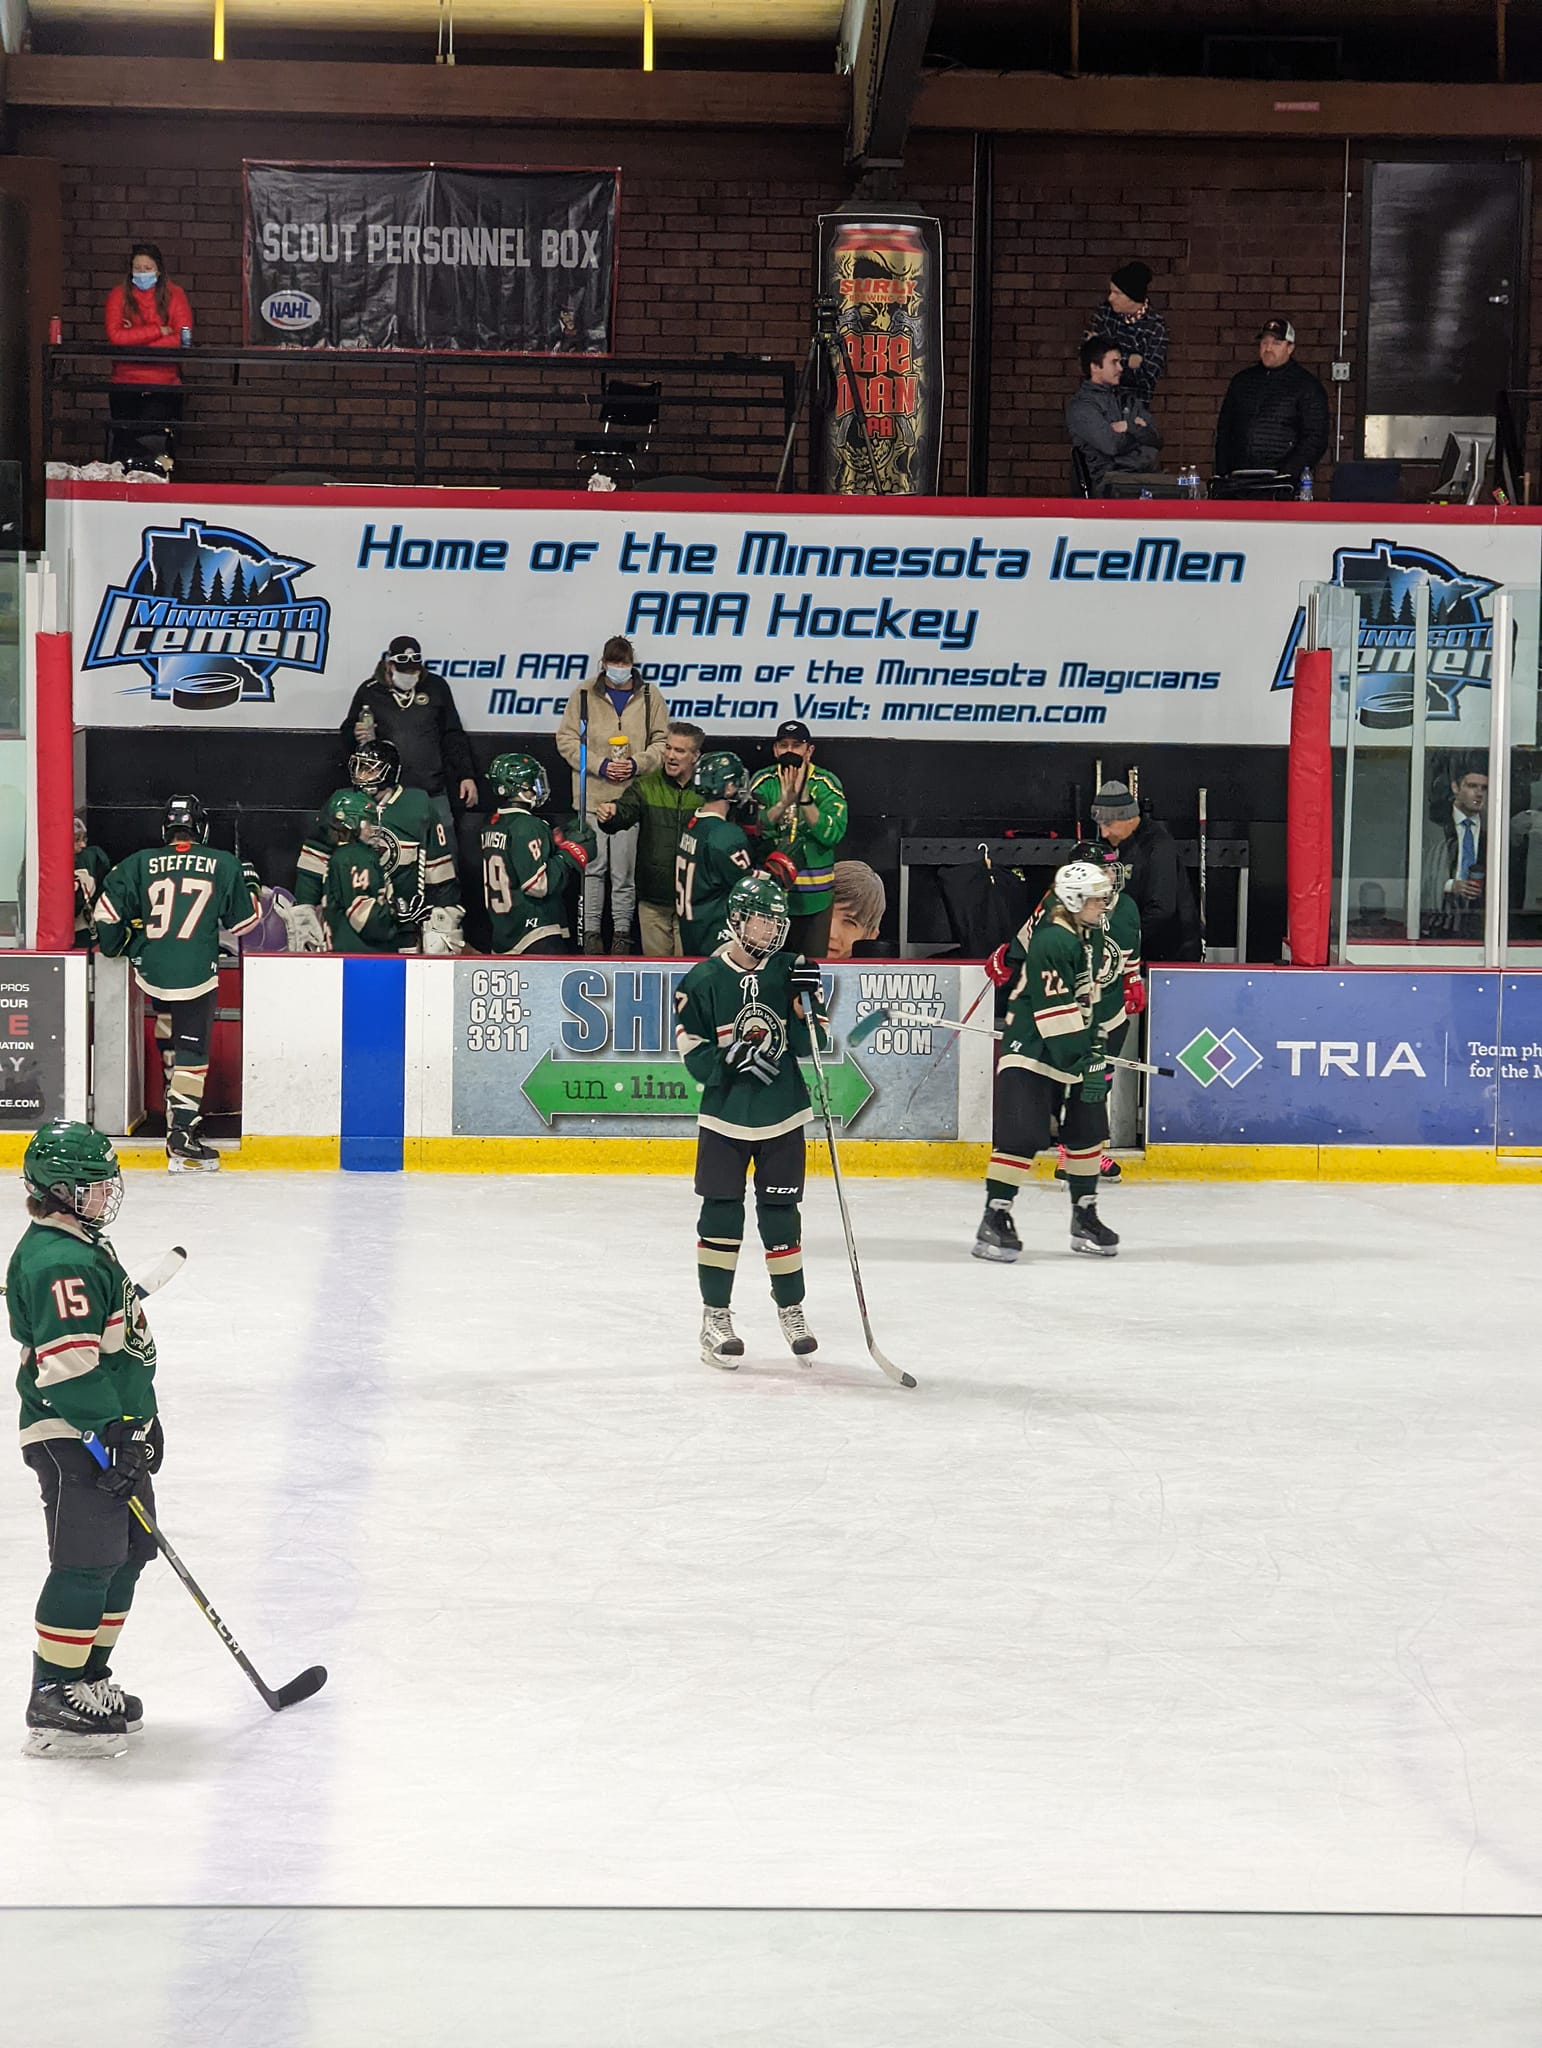 MN Wild Ice Rink Designs: Athletically & Financially Functional